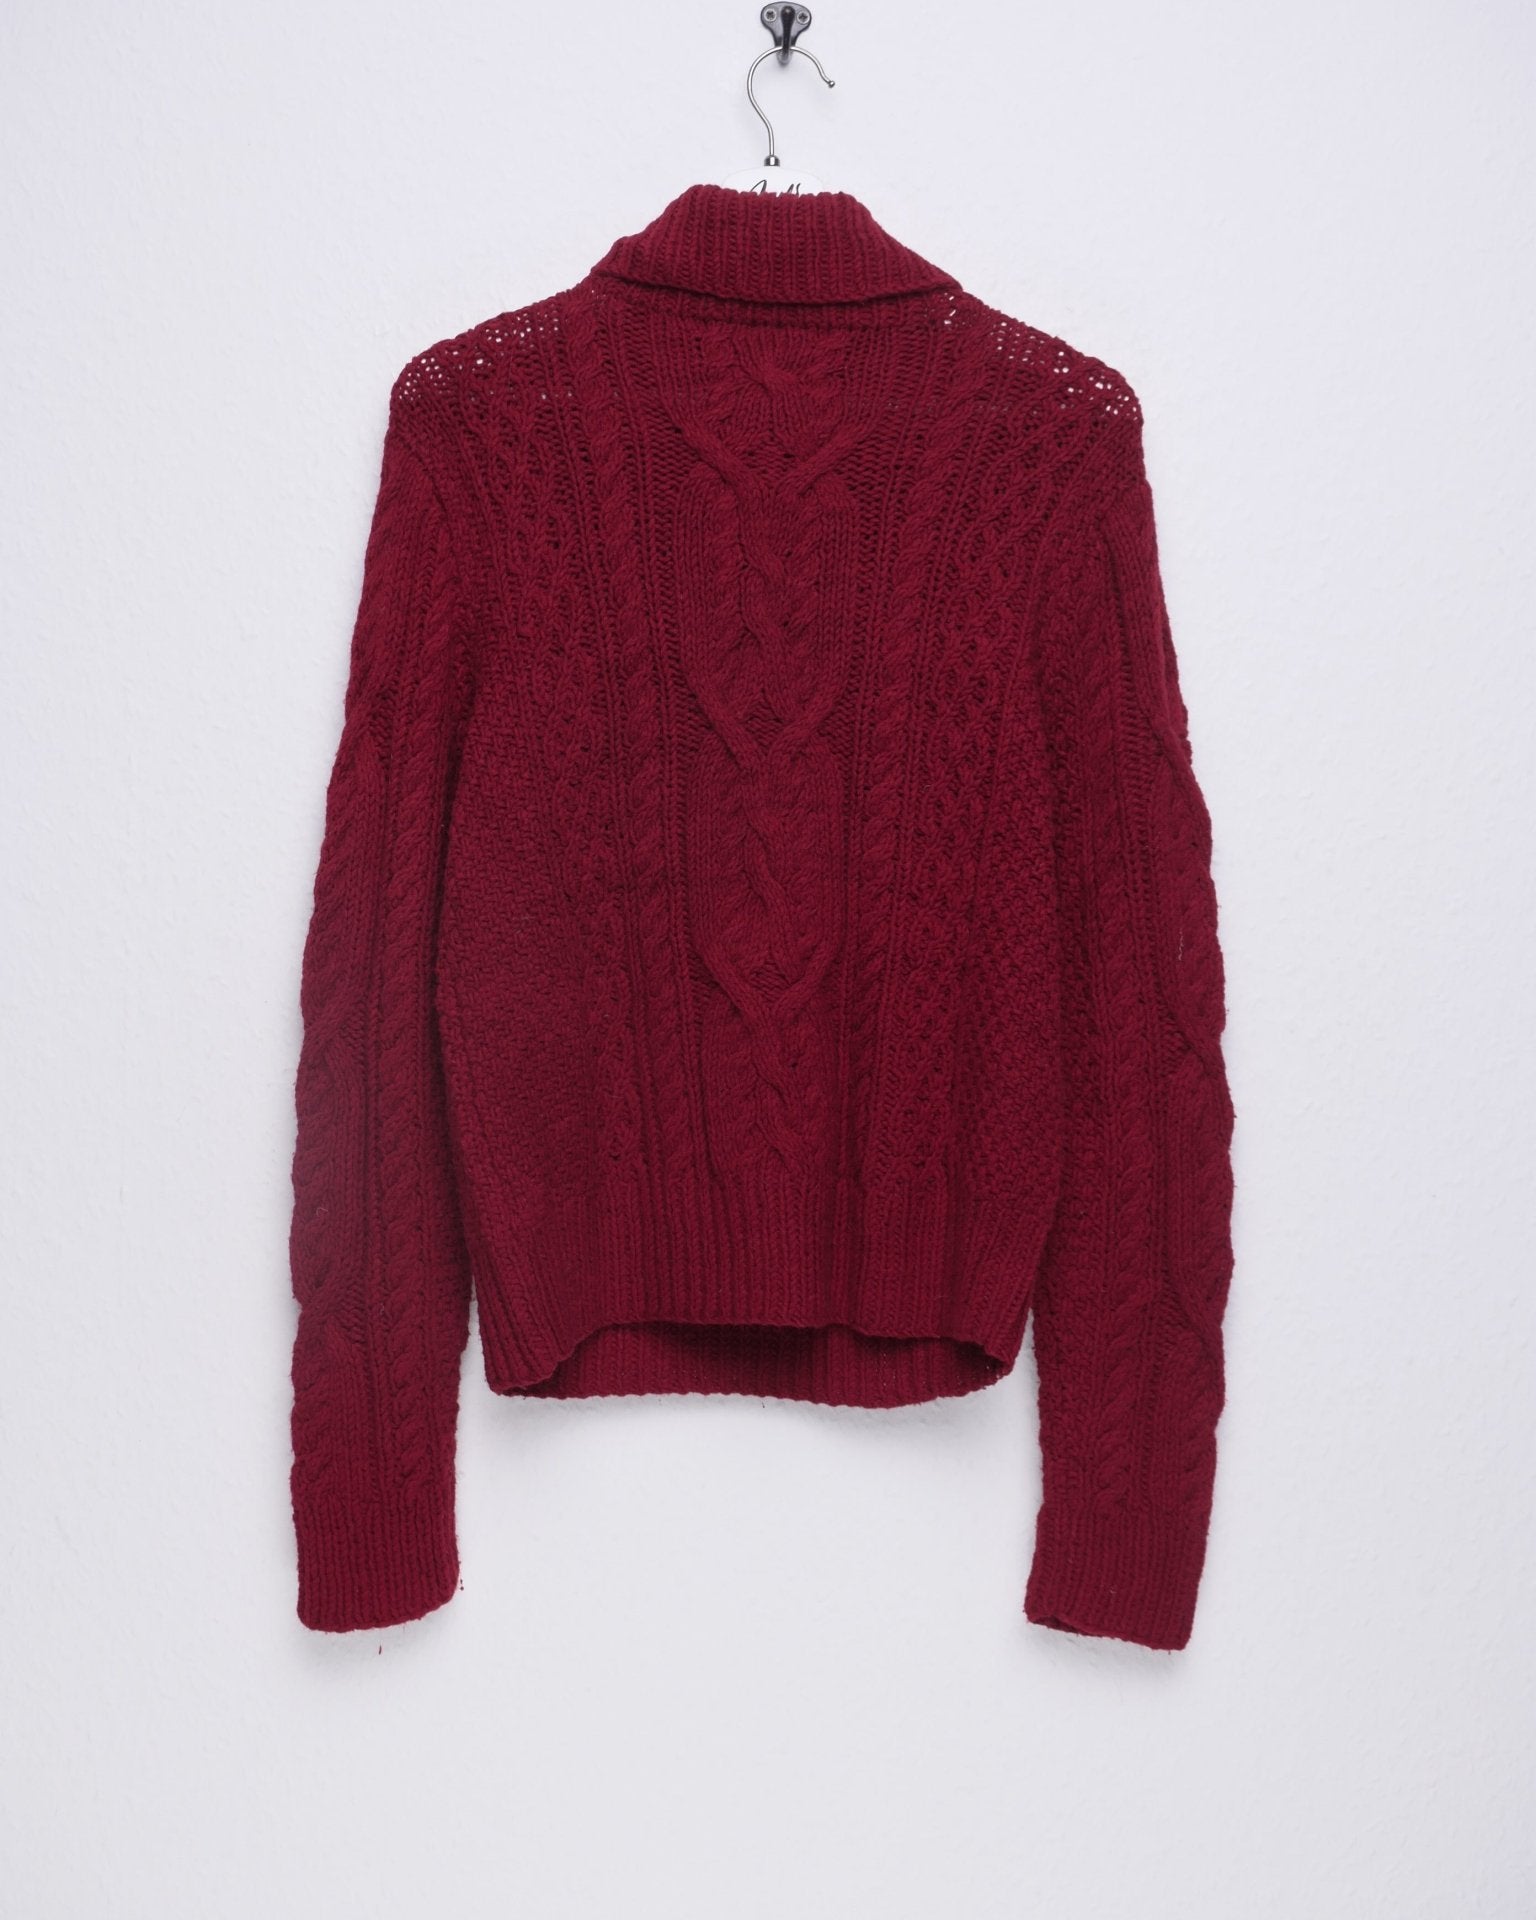 polo patterned wool turtle neck Sweater - Peeces